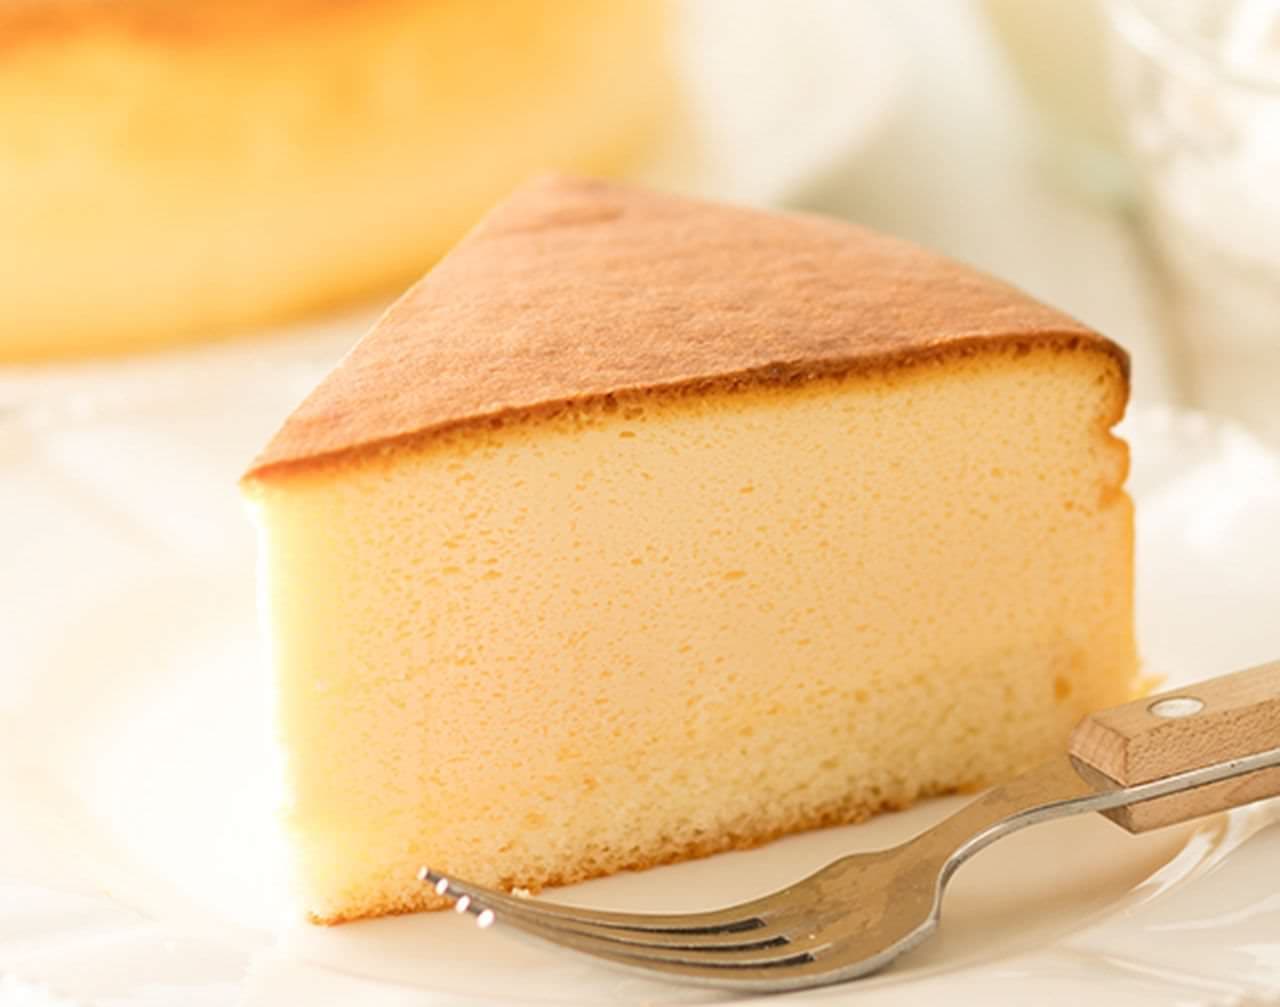 Chateraise "Fluffy Souffle Cheesecake"